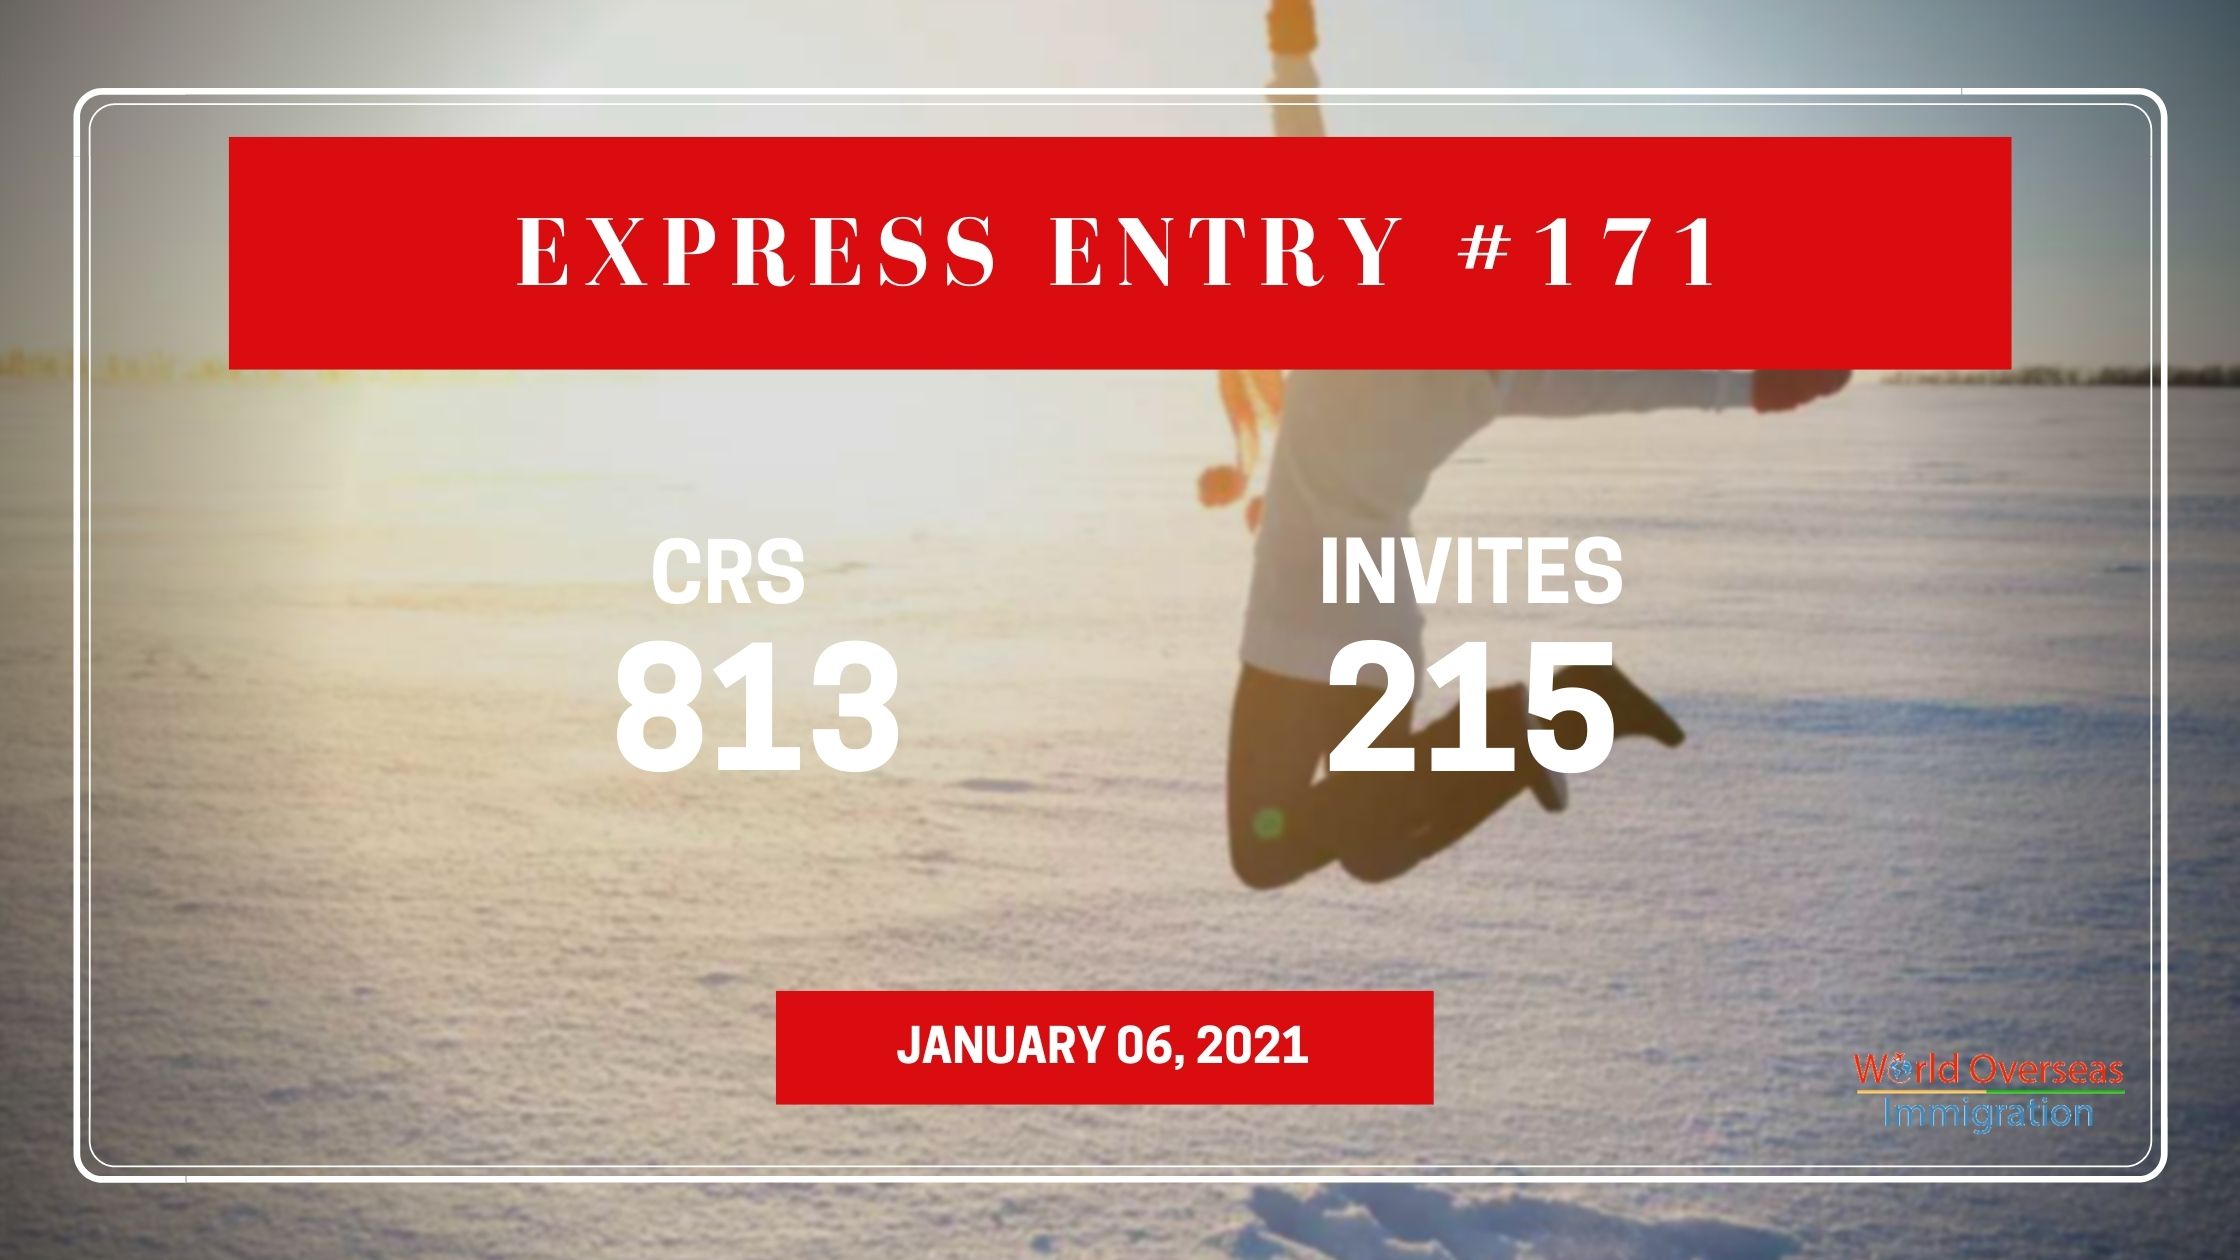 Express Entry #171: 250 ITAs are issued in the new draw